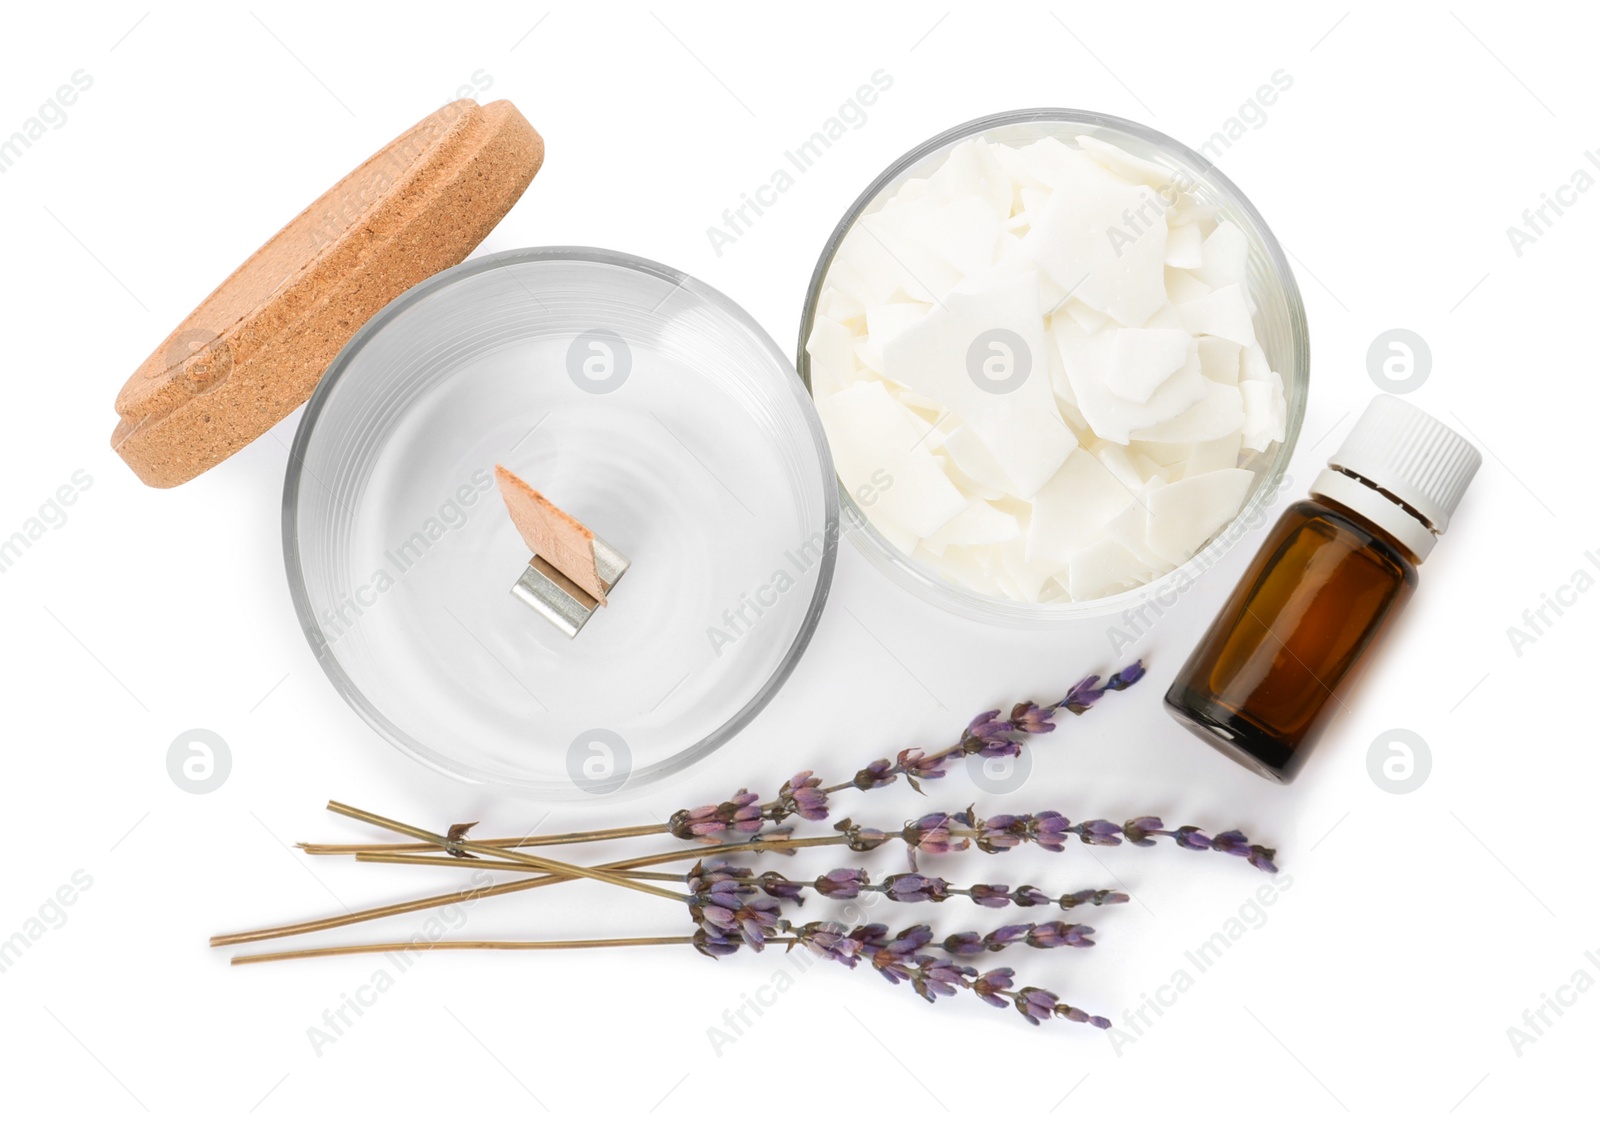 Photo of Wax flakes, dry lavender and essential oil on white background, top view. Making homemade candle